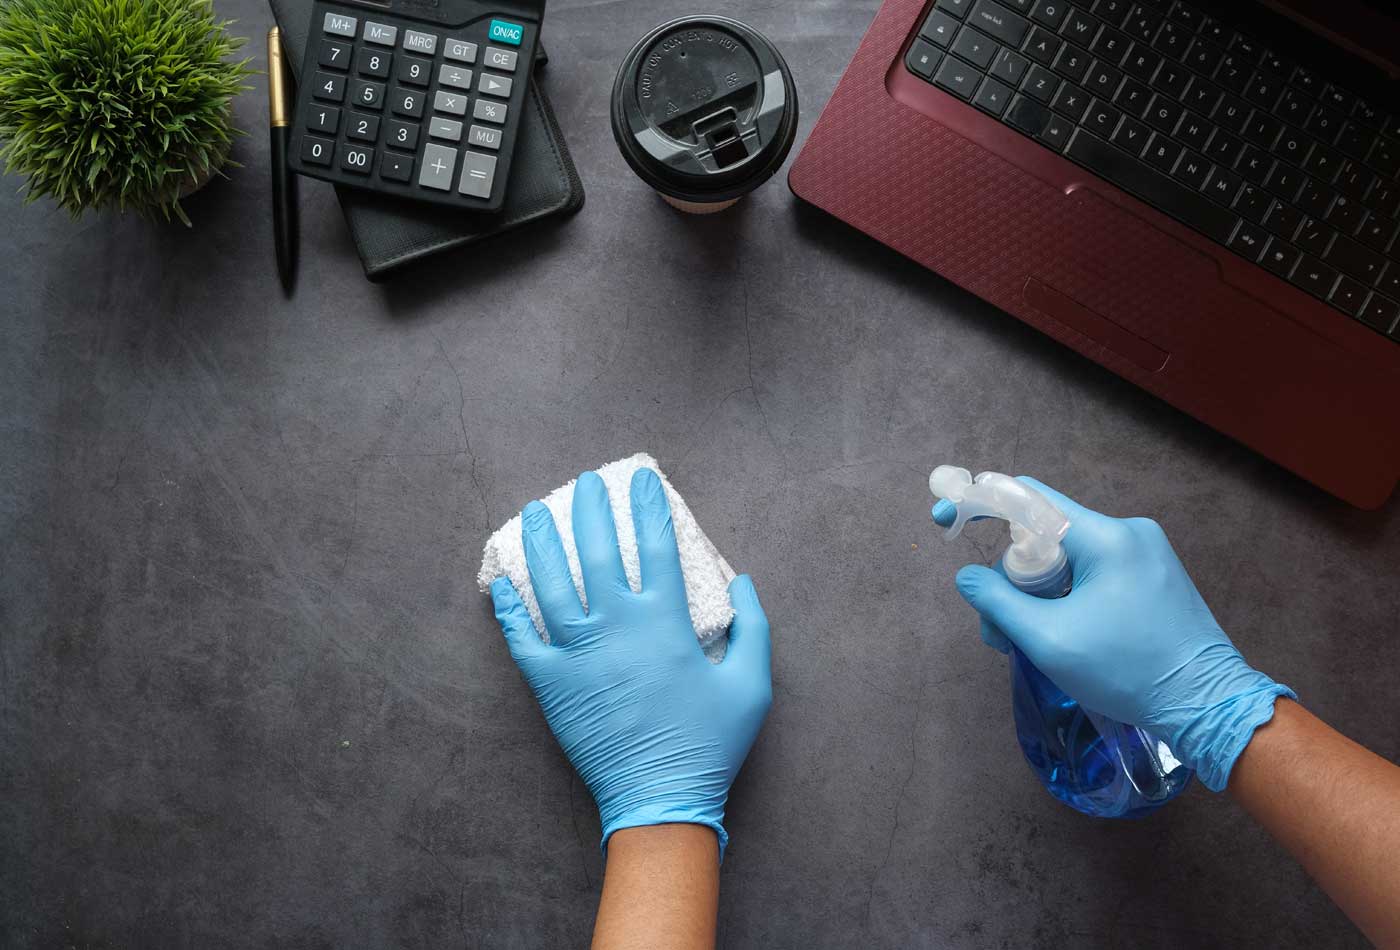 Cleaning business insurance - Shows a person cleaning a desk